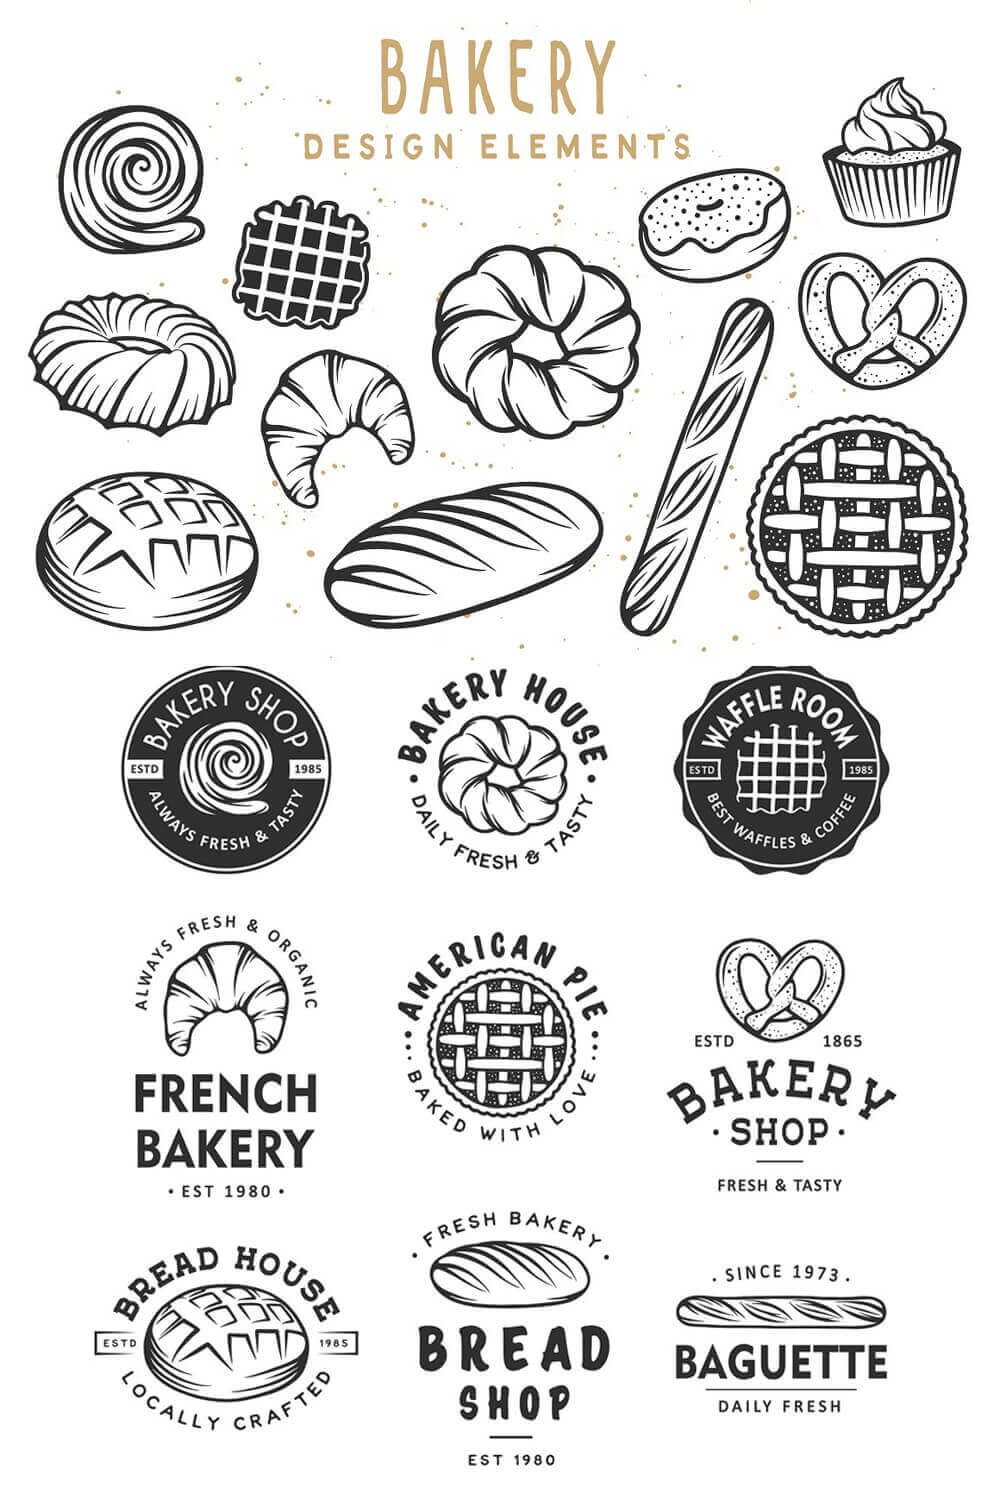 A large set of bakery elements in the form of buns, croissants, pies, cakes, donuts and baguettes for Pinterest.